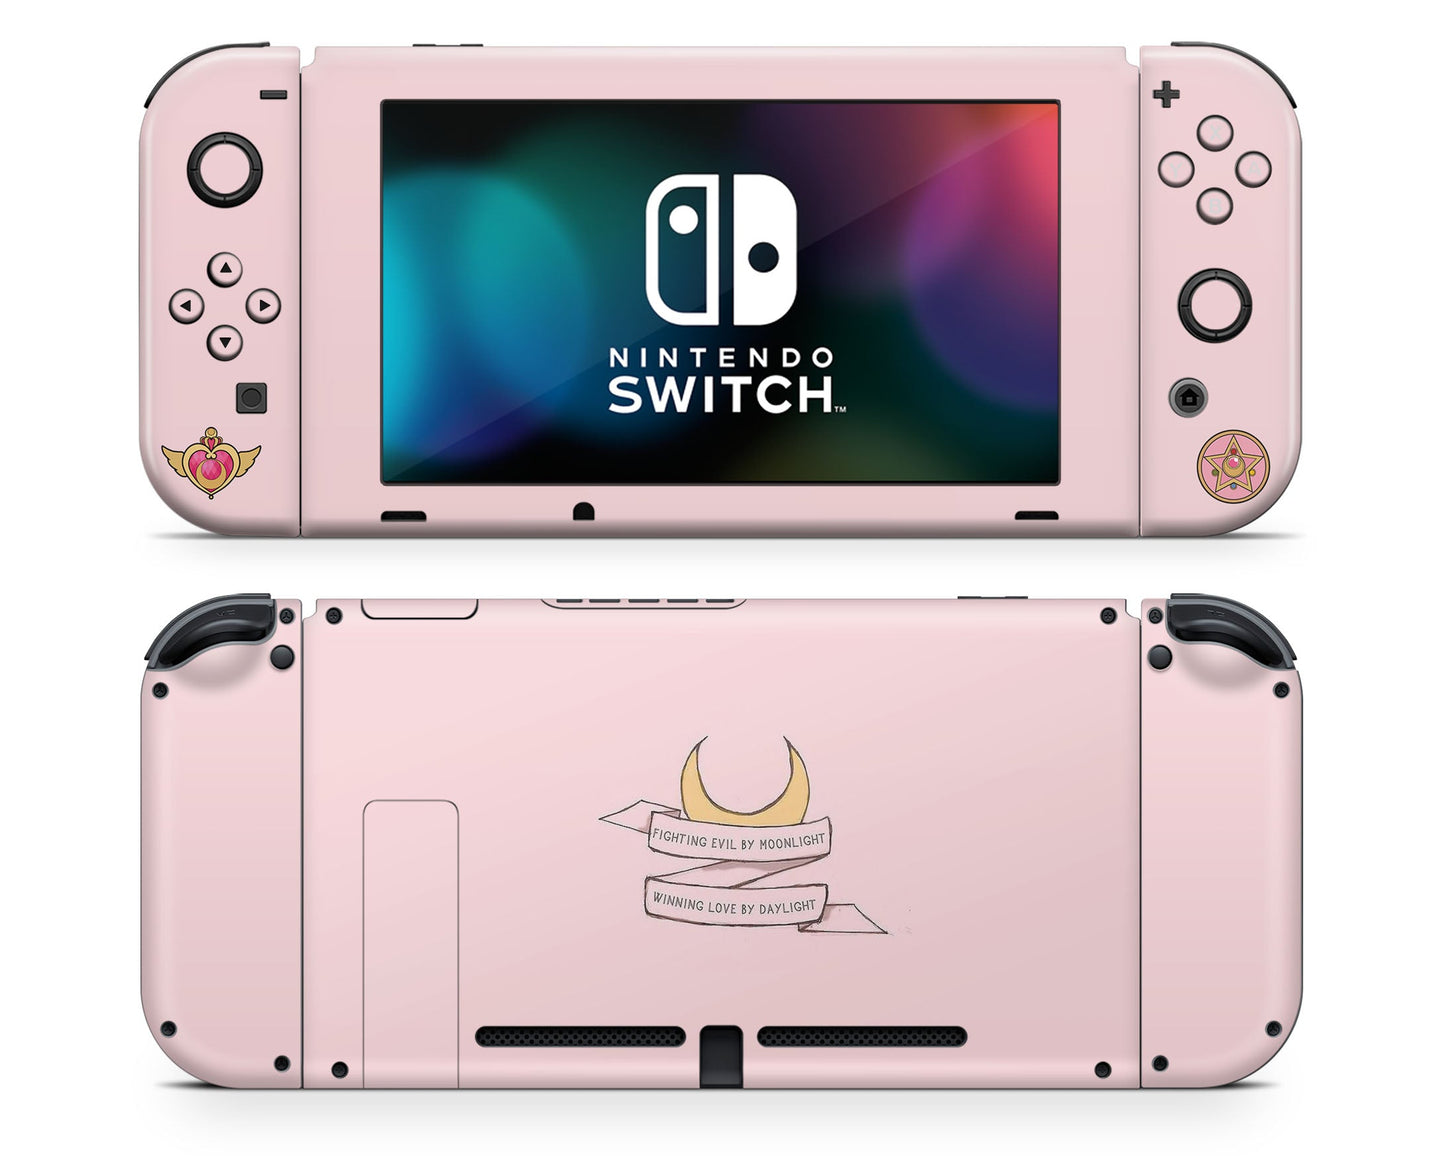 Lux Skins Nintendo Switch Sailor Moon Fighting Evil By Moonlight Full Set +Tempered Glass Skins - Pop Culture Sailor Moon Skin